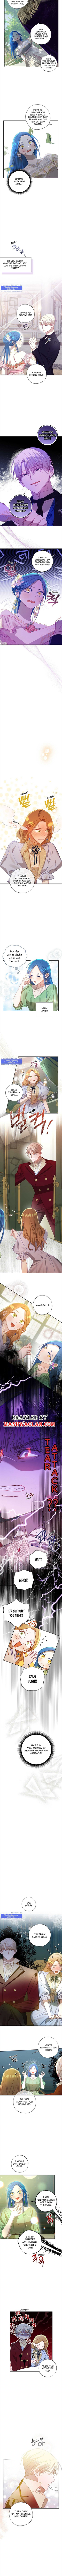 I am Afraid I have Failed to Divorce Chapter 60 page 3